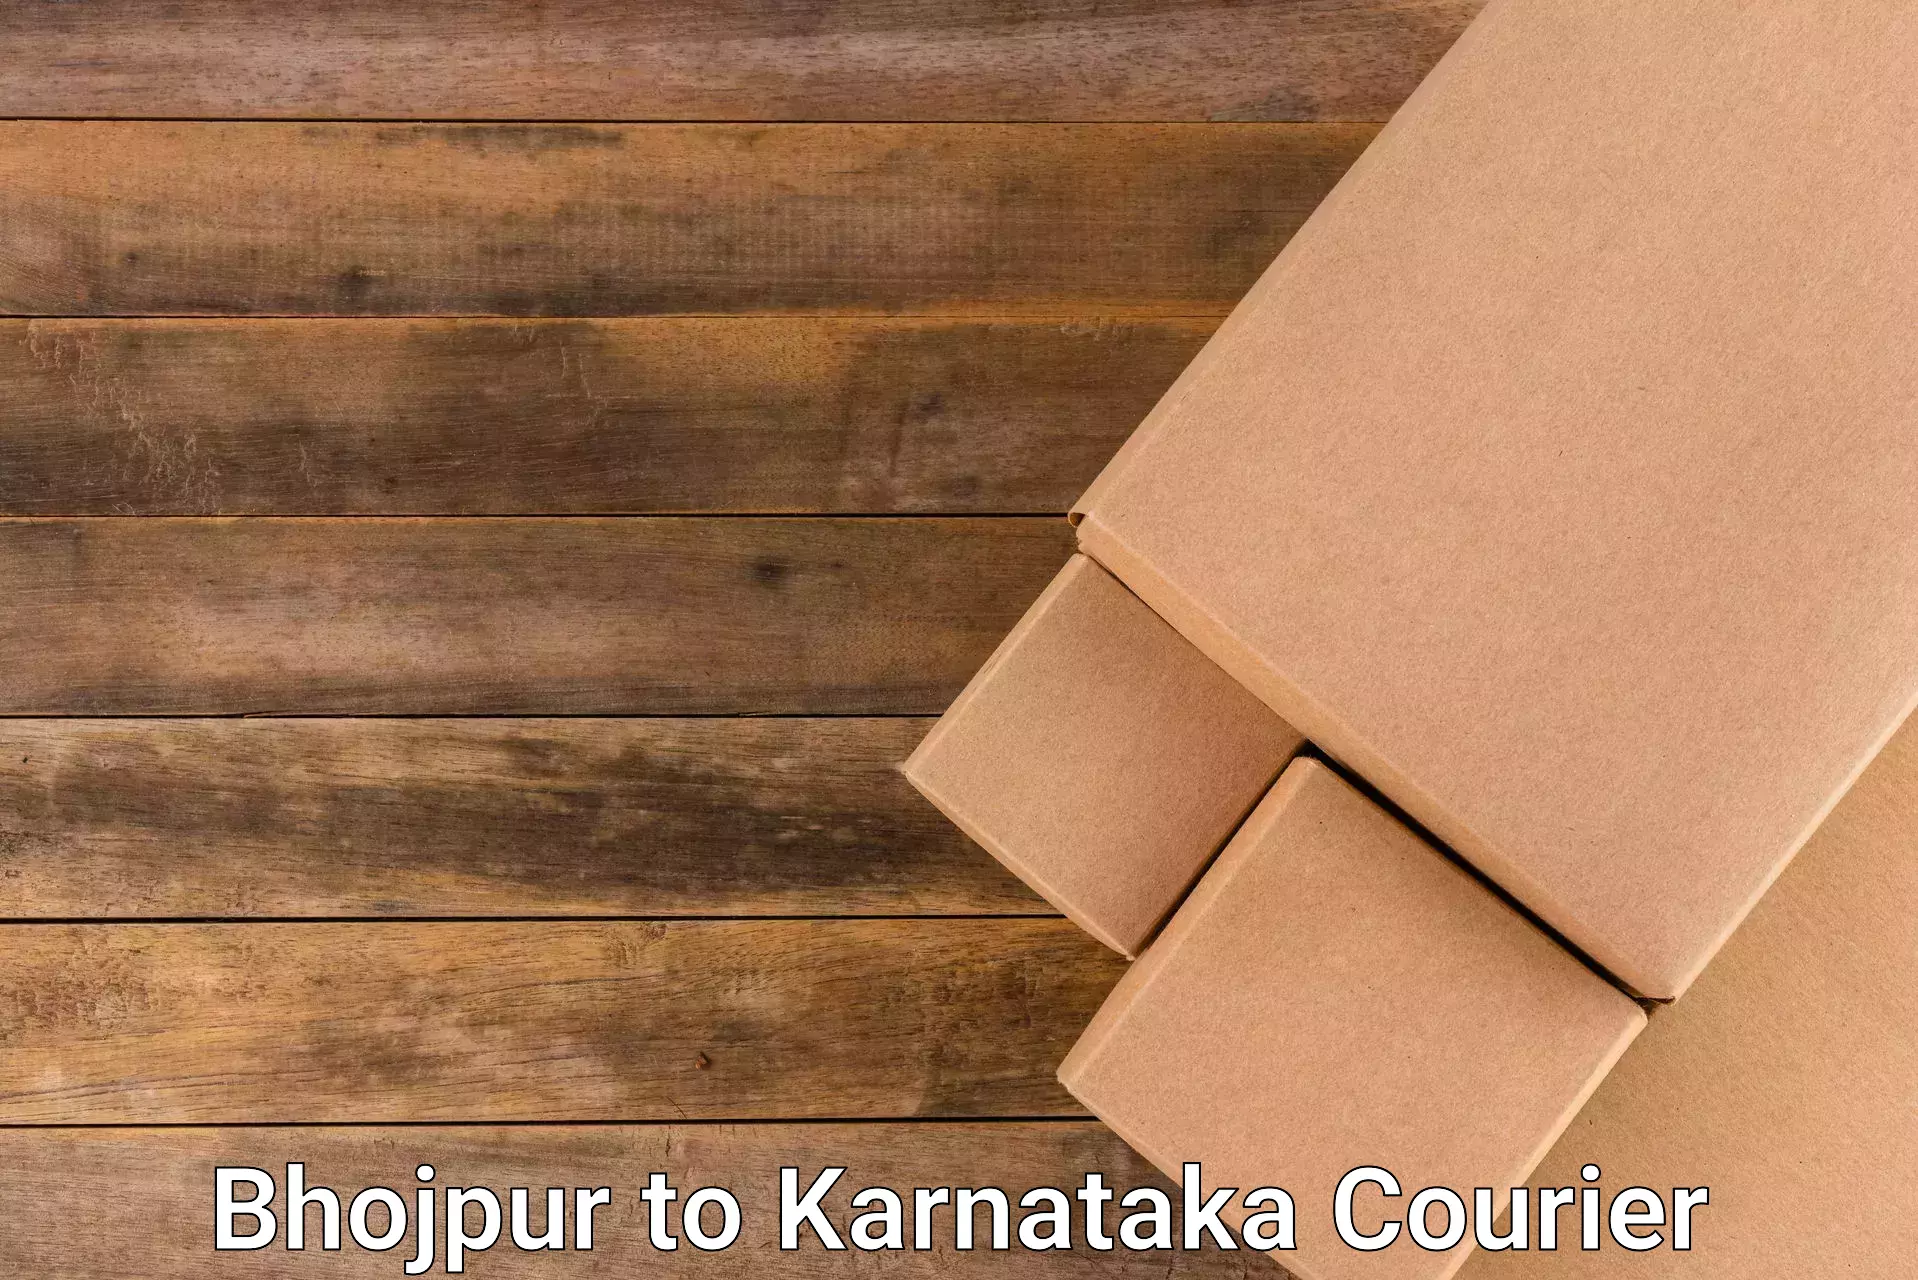 Multi-service courier options in Bhojpur to Harohalli